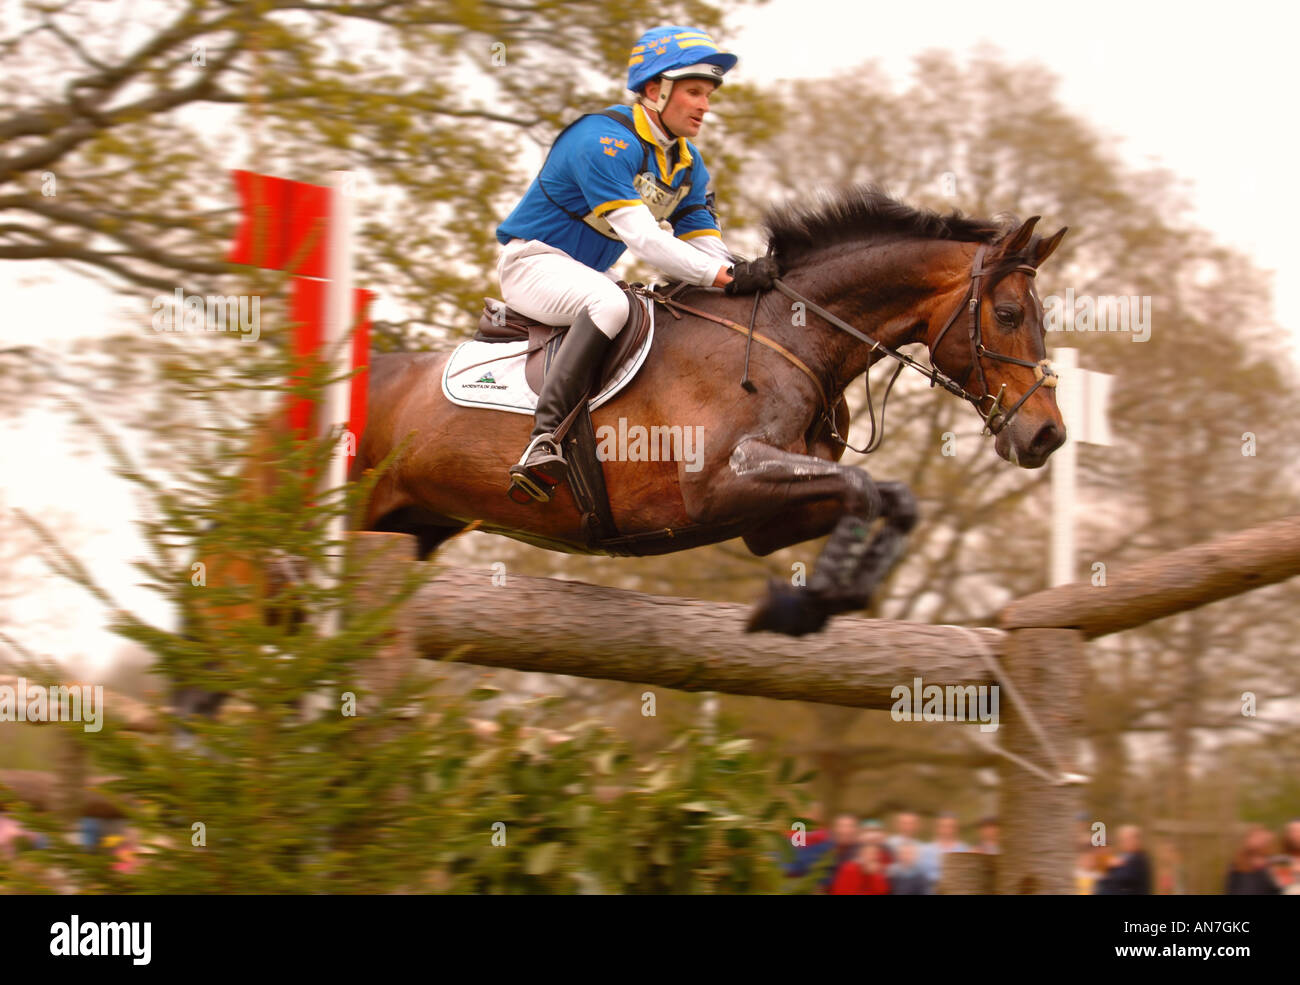 JOHAN LUNDIN ON THE HORSE MAJOR TOM JUMPING THE SHOGUN HOLLOW DURING THE CROSS COUNTRY AT THE BADMINTON HORSE TRIALS 2006 Stock Photo